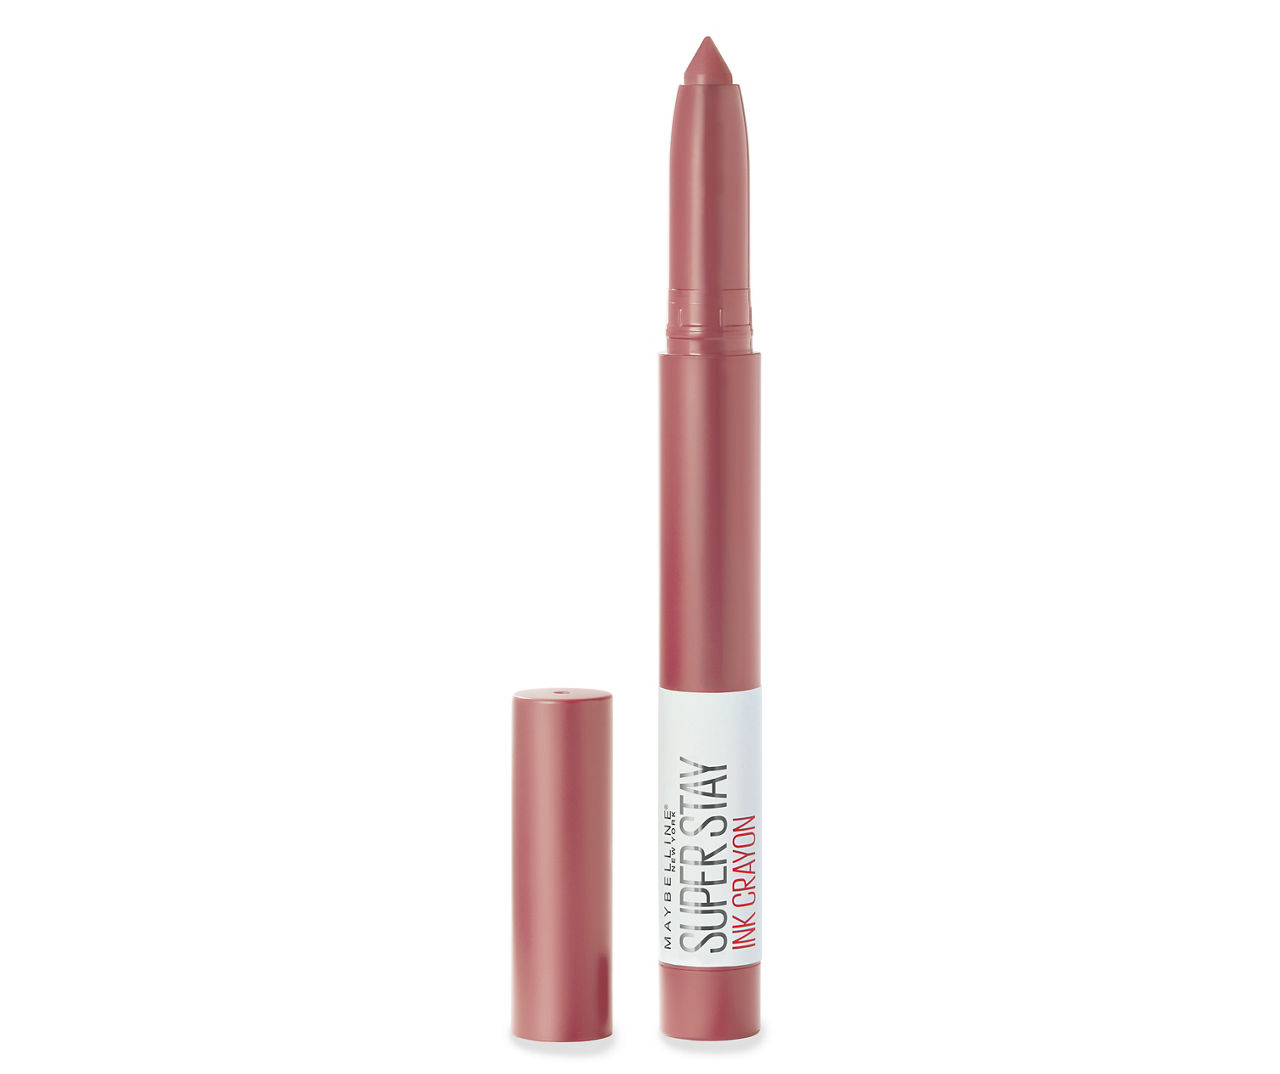 Superstay Ink Crayon Lipstick in Lead the Way